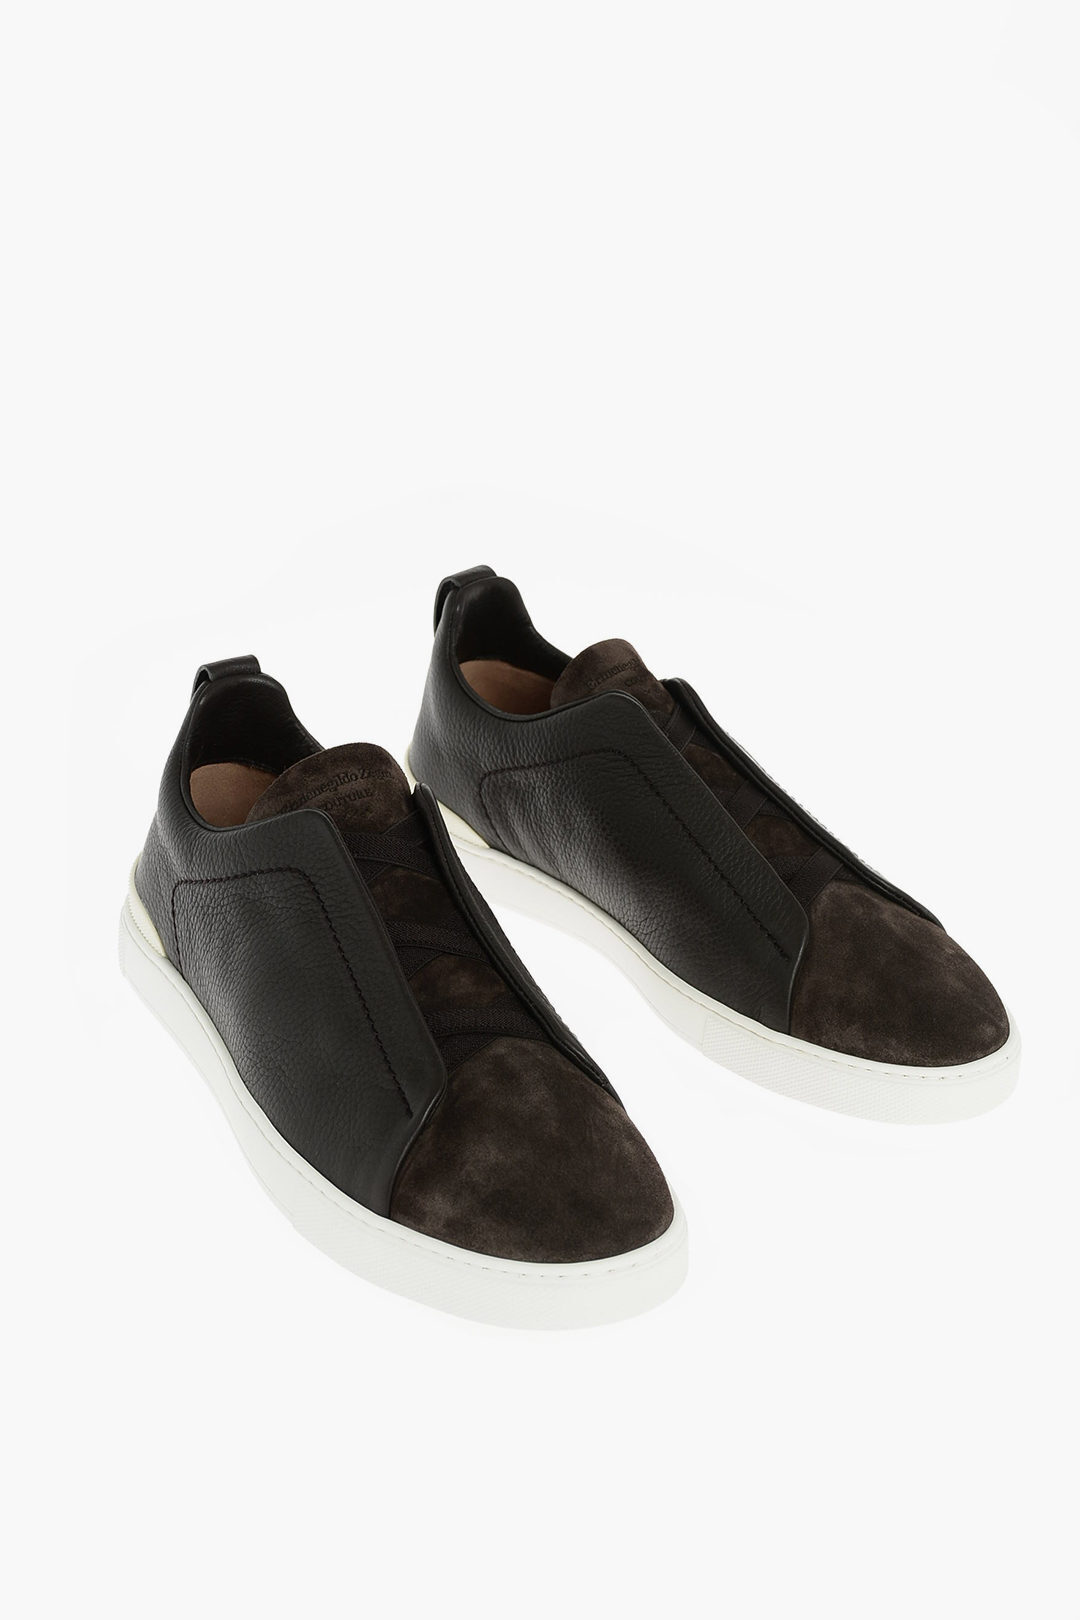 ZEGNA ˥ ˡ A4667X LHRHS 202  COUTURE XXX SUEDE AND TEXTURED LEATHER SNEAKERS ڴǡ̵ۡڥåԥ̵ dk